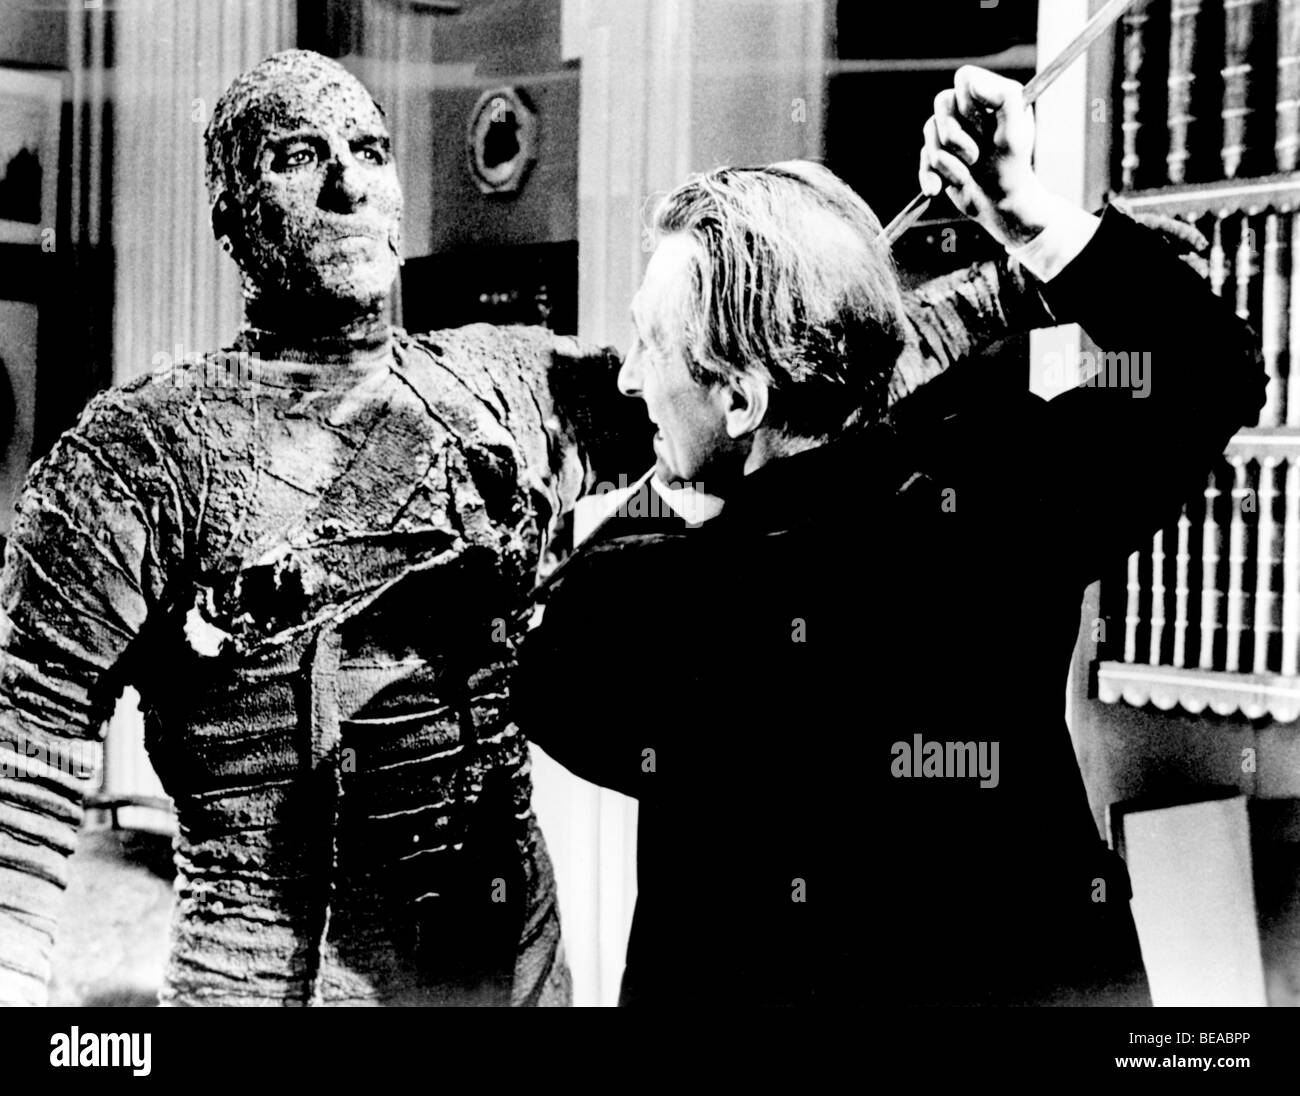 THE MUMMY - 1959 Hammer film with Christopher Lee at left and Peter Cushing Stock Photo